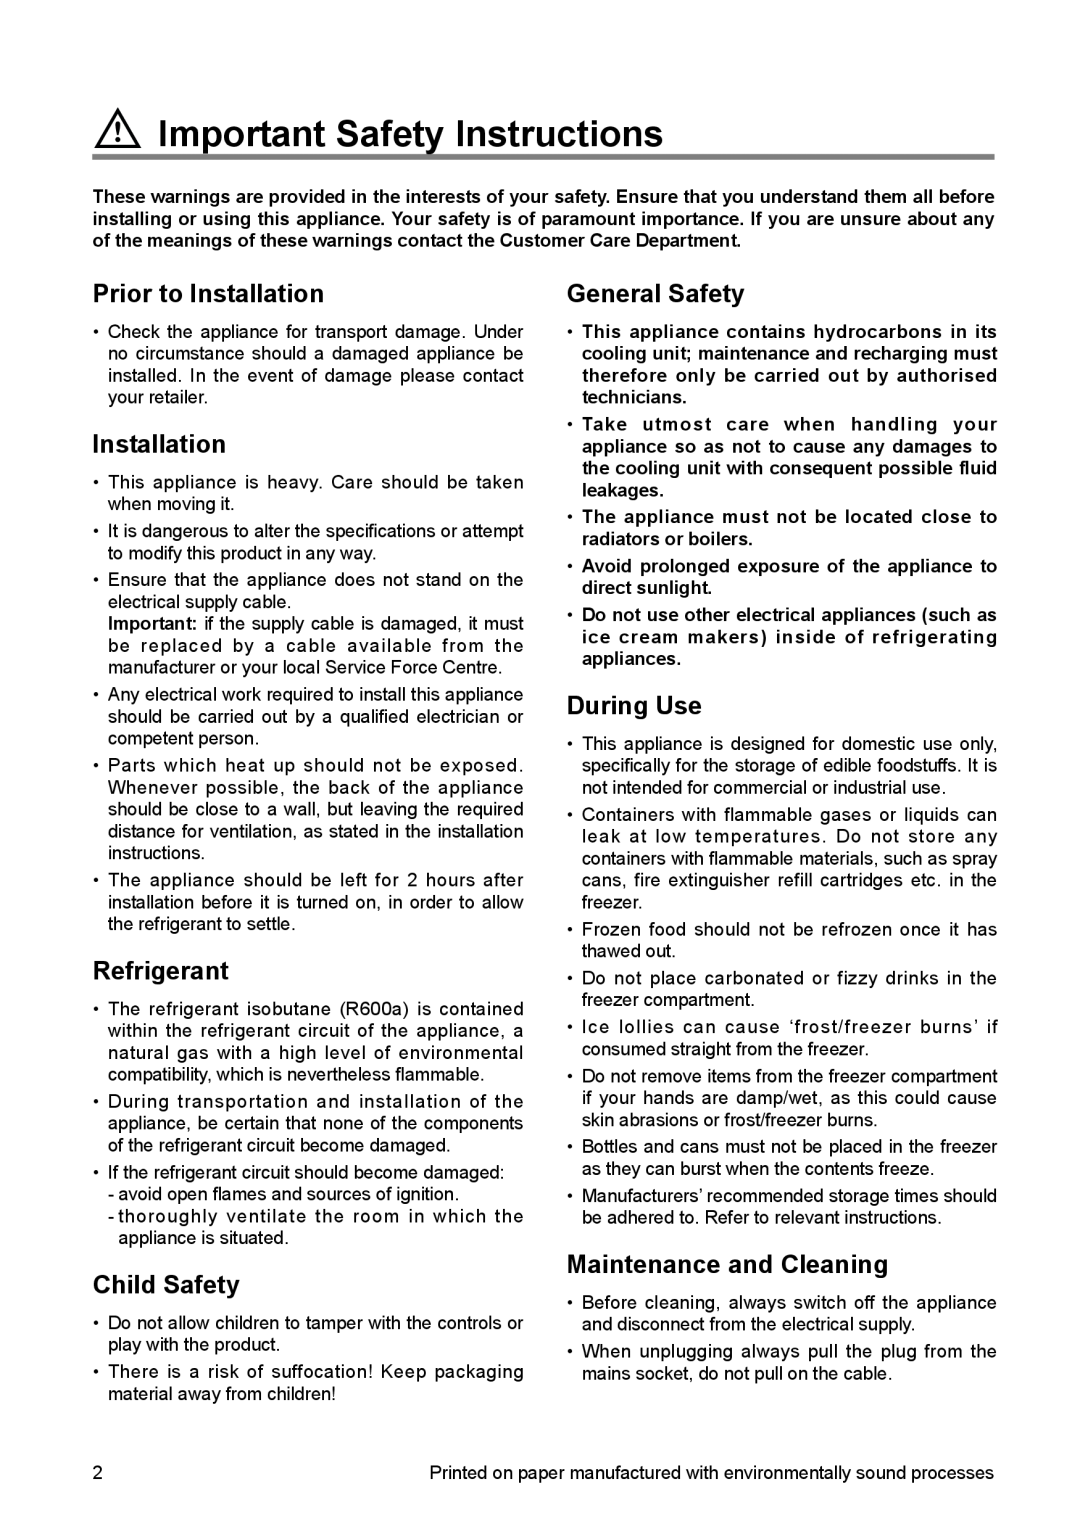 Zanussi ZBF 6114 manual Important Safety Instructions, Prior to Installation, Refrigerant, General Safety, During Use 